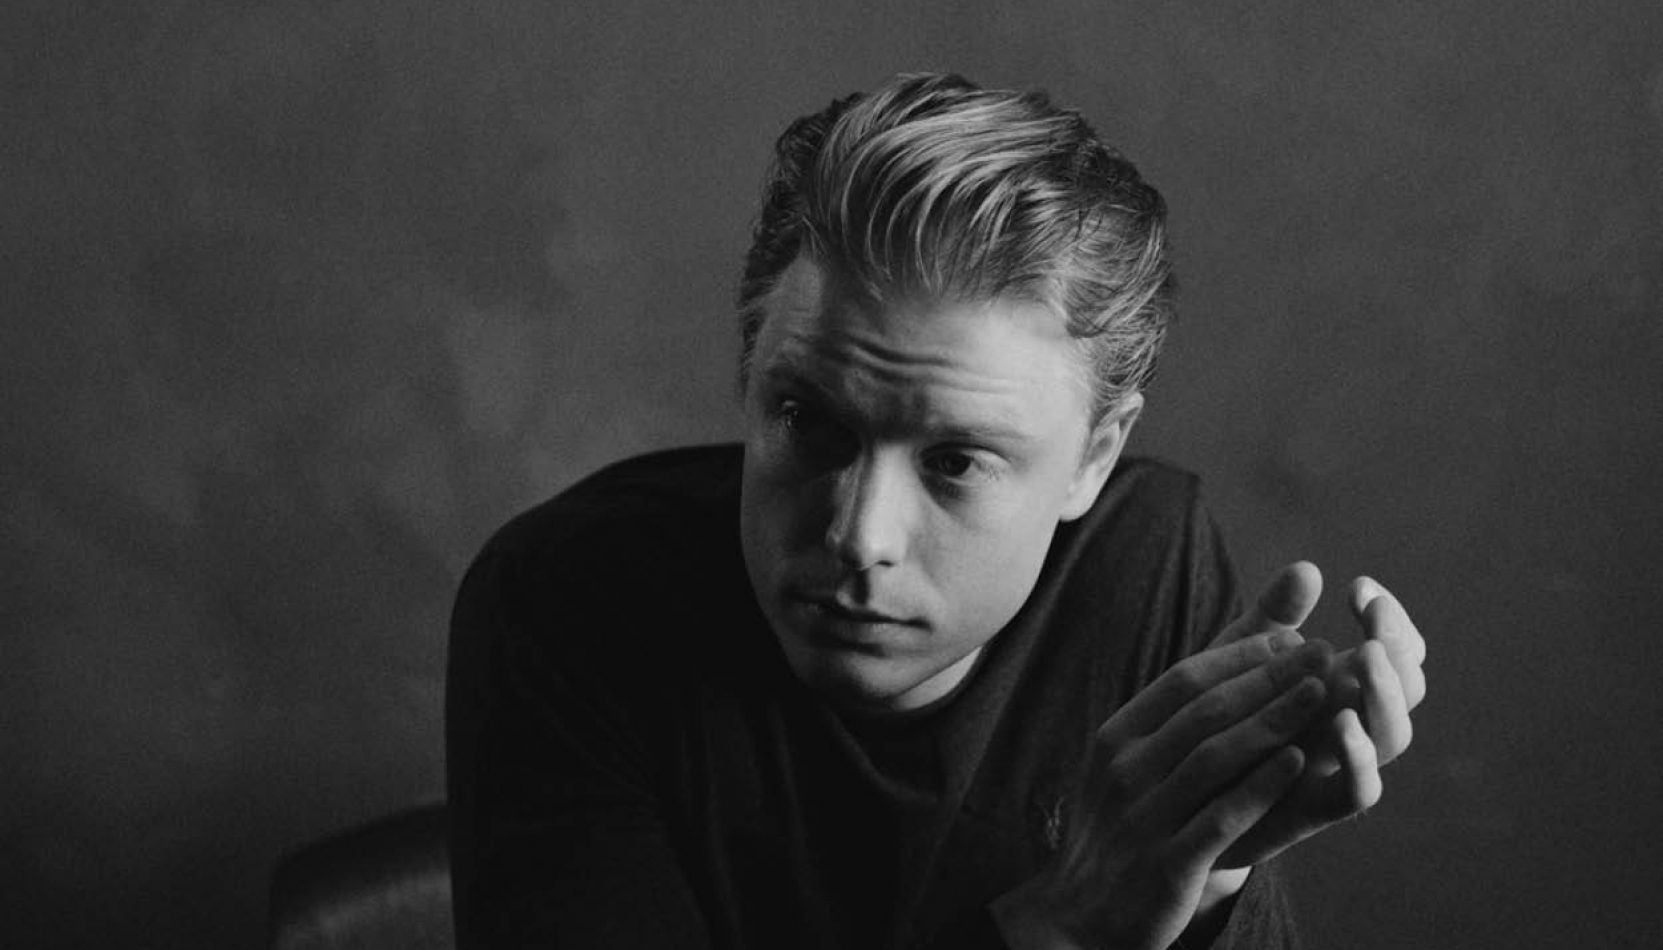 freddie fox, interview, talking to freddie fox, guildford shakespeare company, holy trinity church, theatre, drama, tragedy, guide to whats on, guide to guildford, guide to surrey, whats on, things to do, nights out,